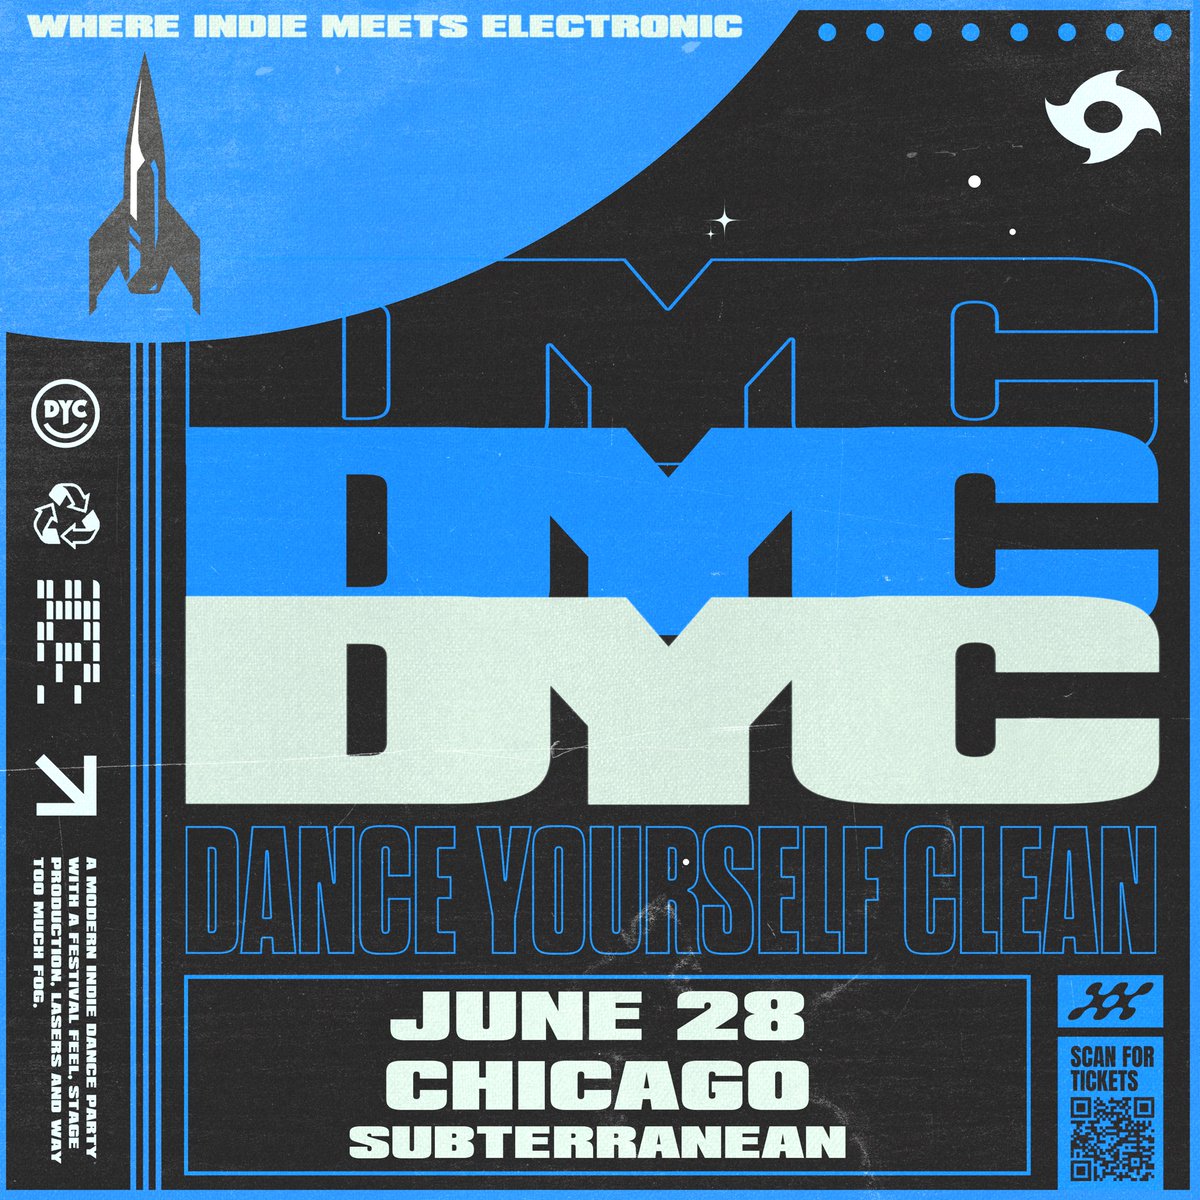 🚀JUST ANNOUNCED🚀 DANCE YOURSELF CLEAN (@DYCTonight) Friday, June 28 | 21+  Tickets @ subt.net